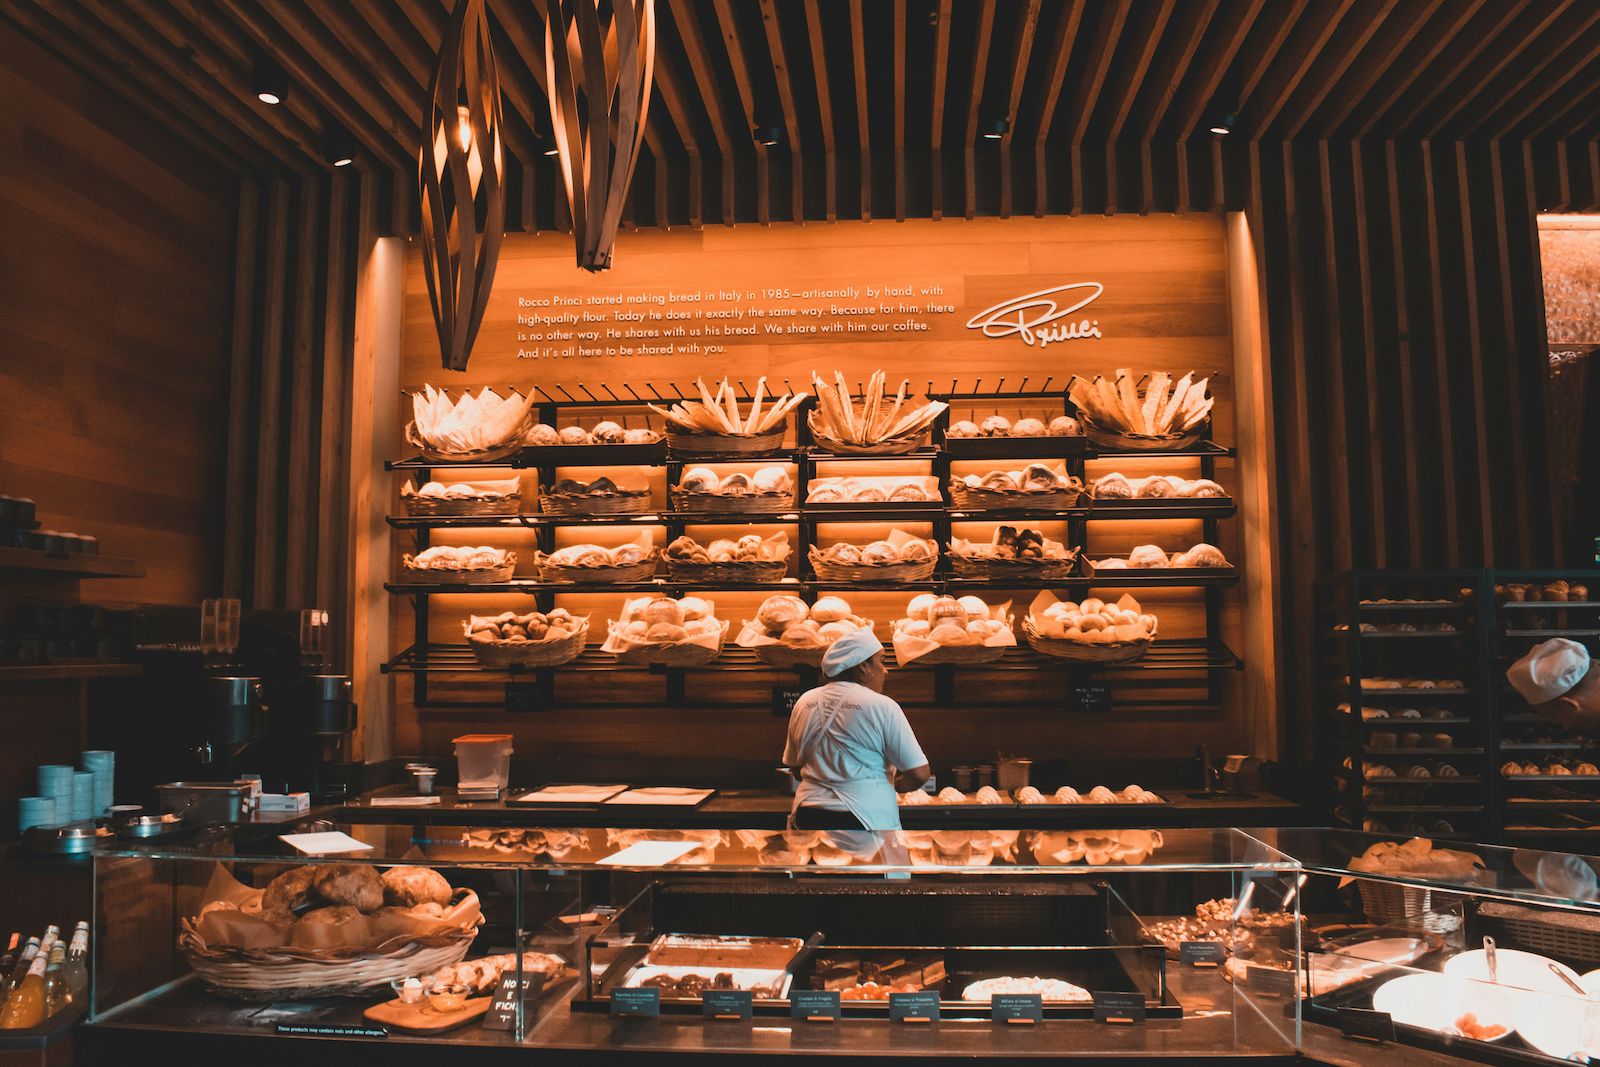 A picture of the inside of a bakery business.